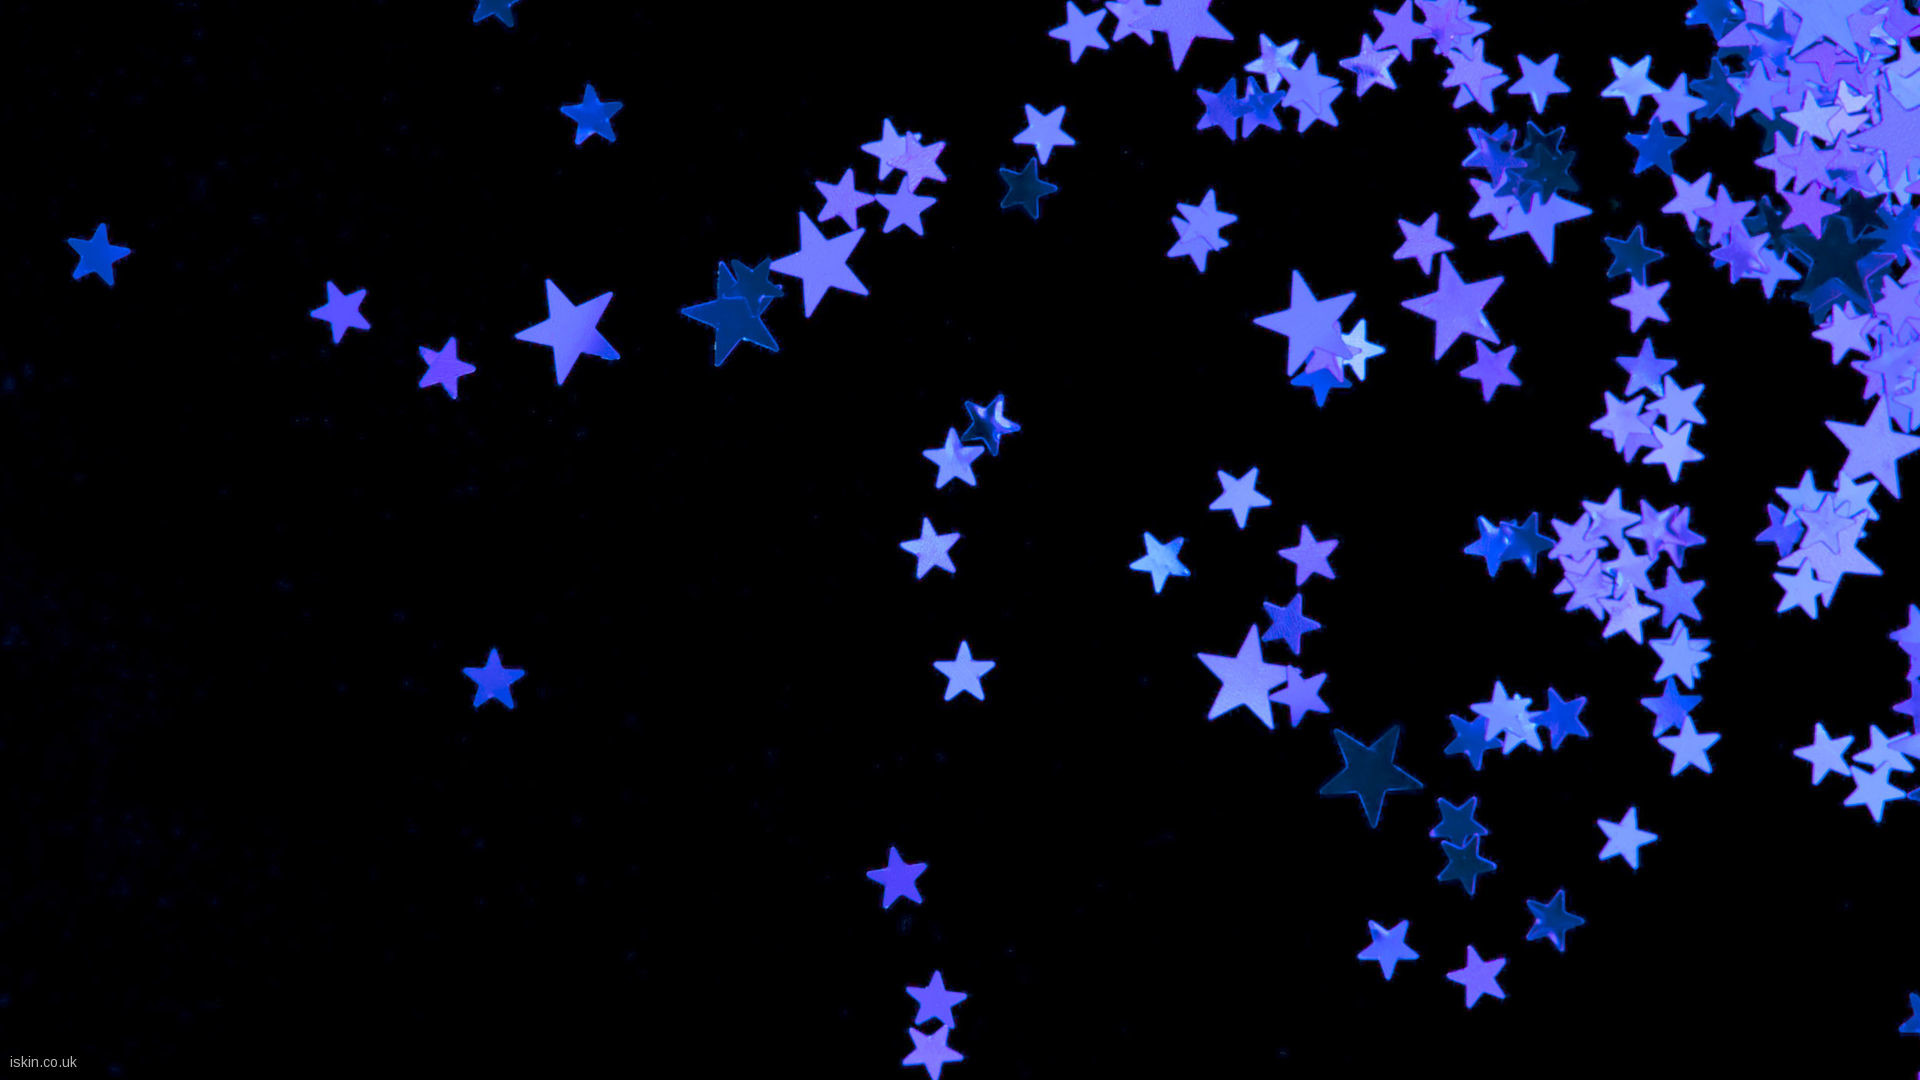 1920x1080 Black And Blue Star Background wallpaper